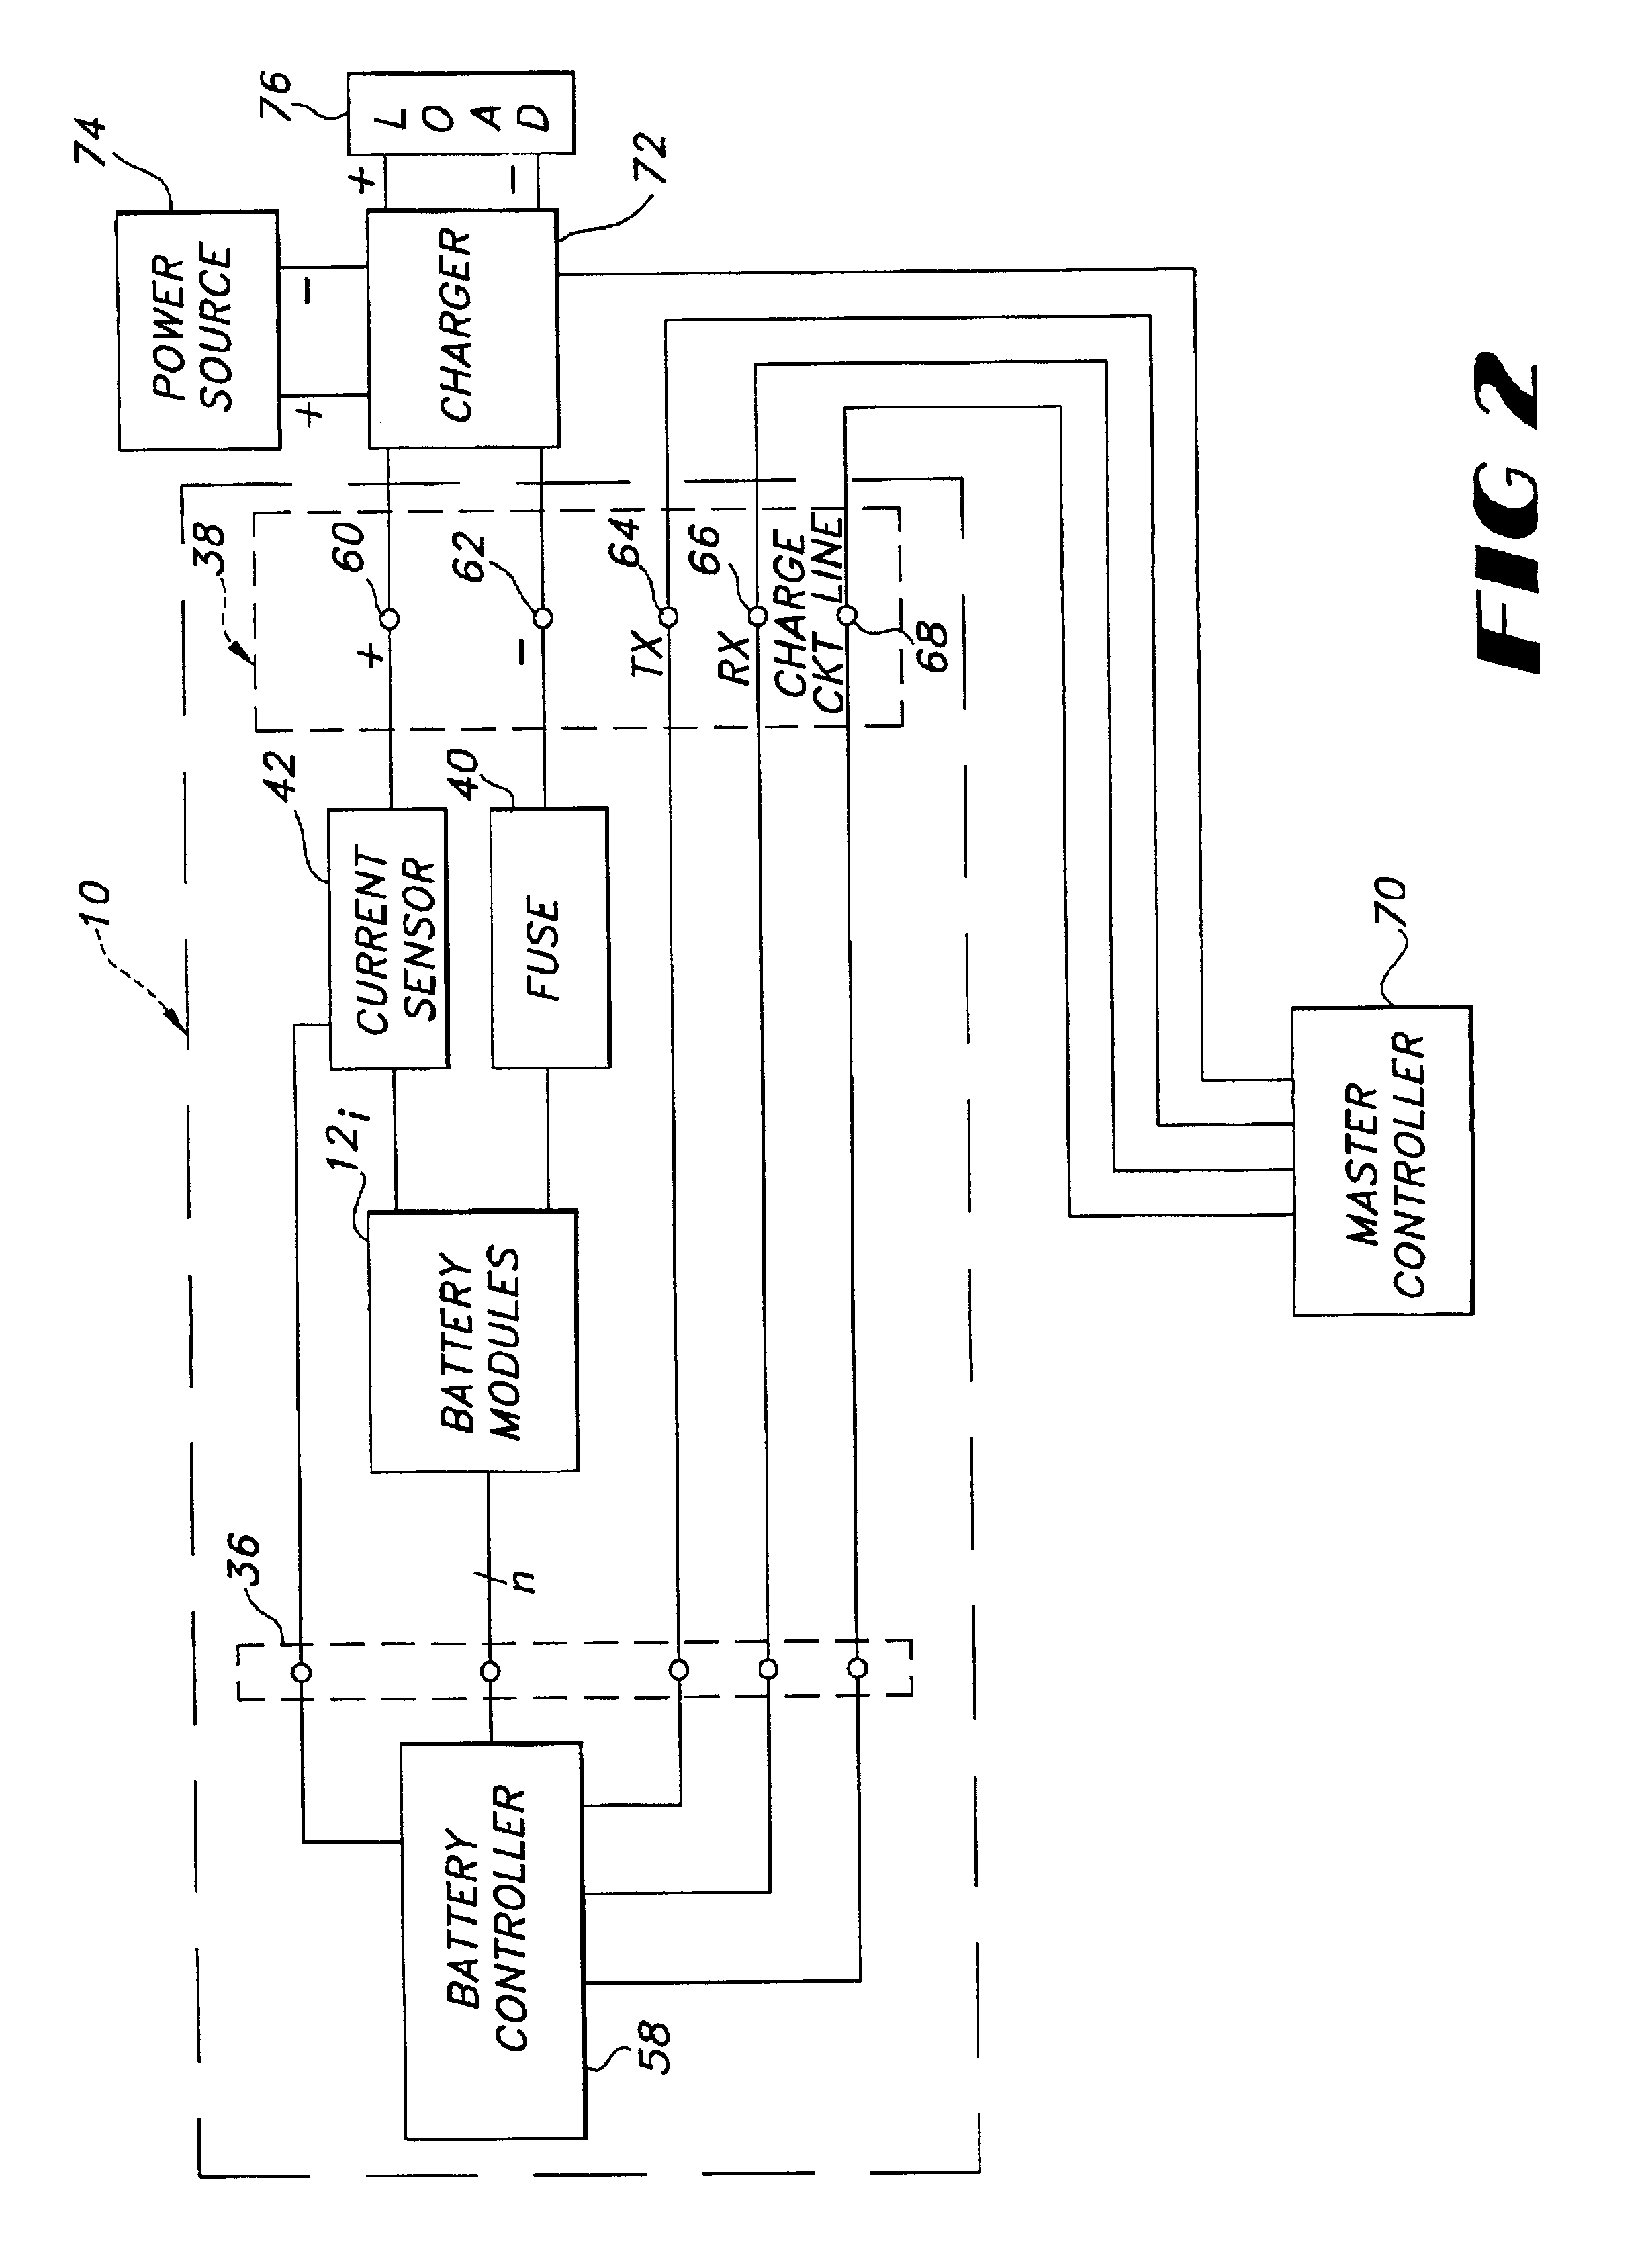 Battery pack having improved battery cell terminal configuration